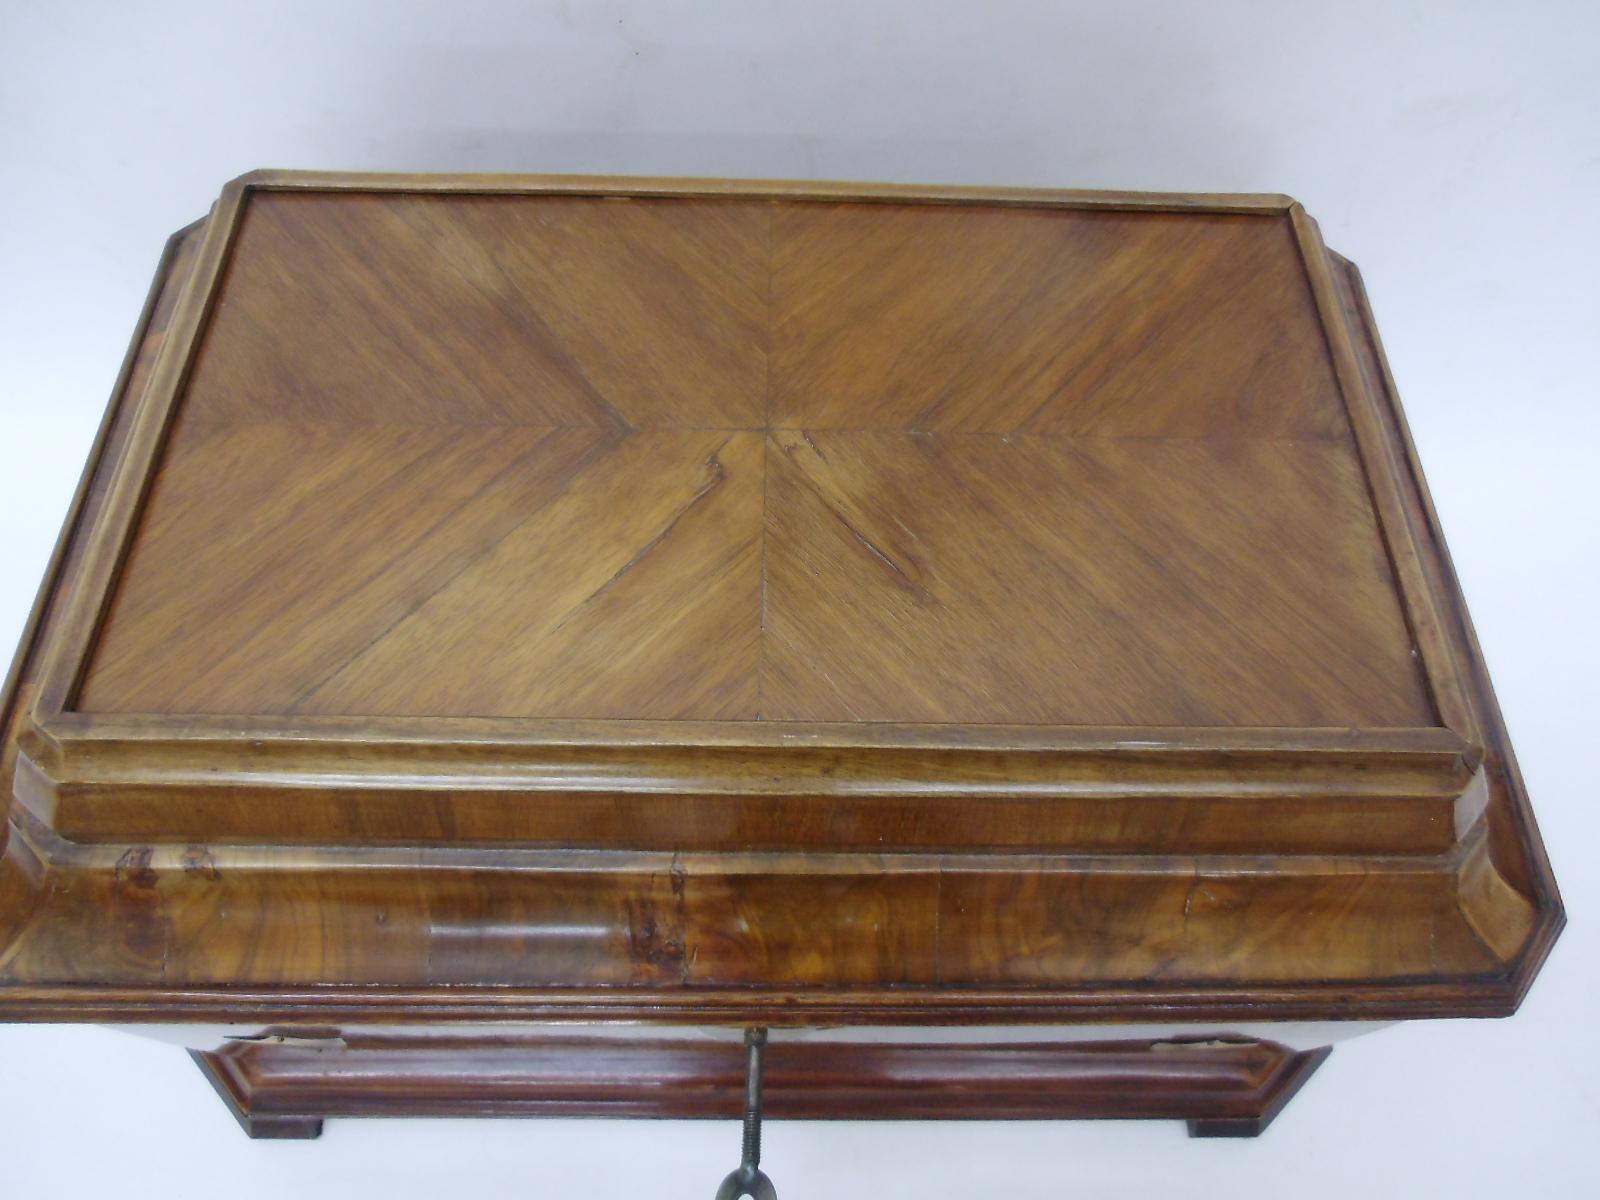 Original joiner guild chest from Germany, circa 1835. This finely crafted chest was used to store the most valuable belongings of the joiners guild including their guild documents, statues and official seal stamp. This particularly beautiful small